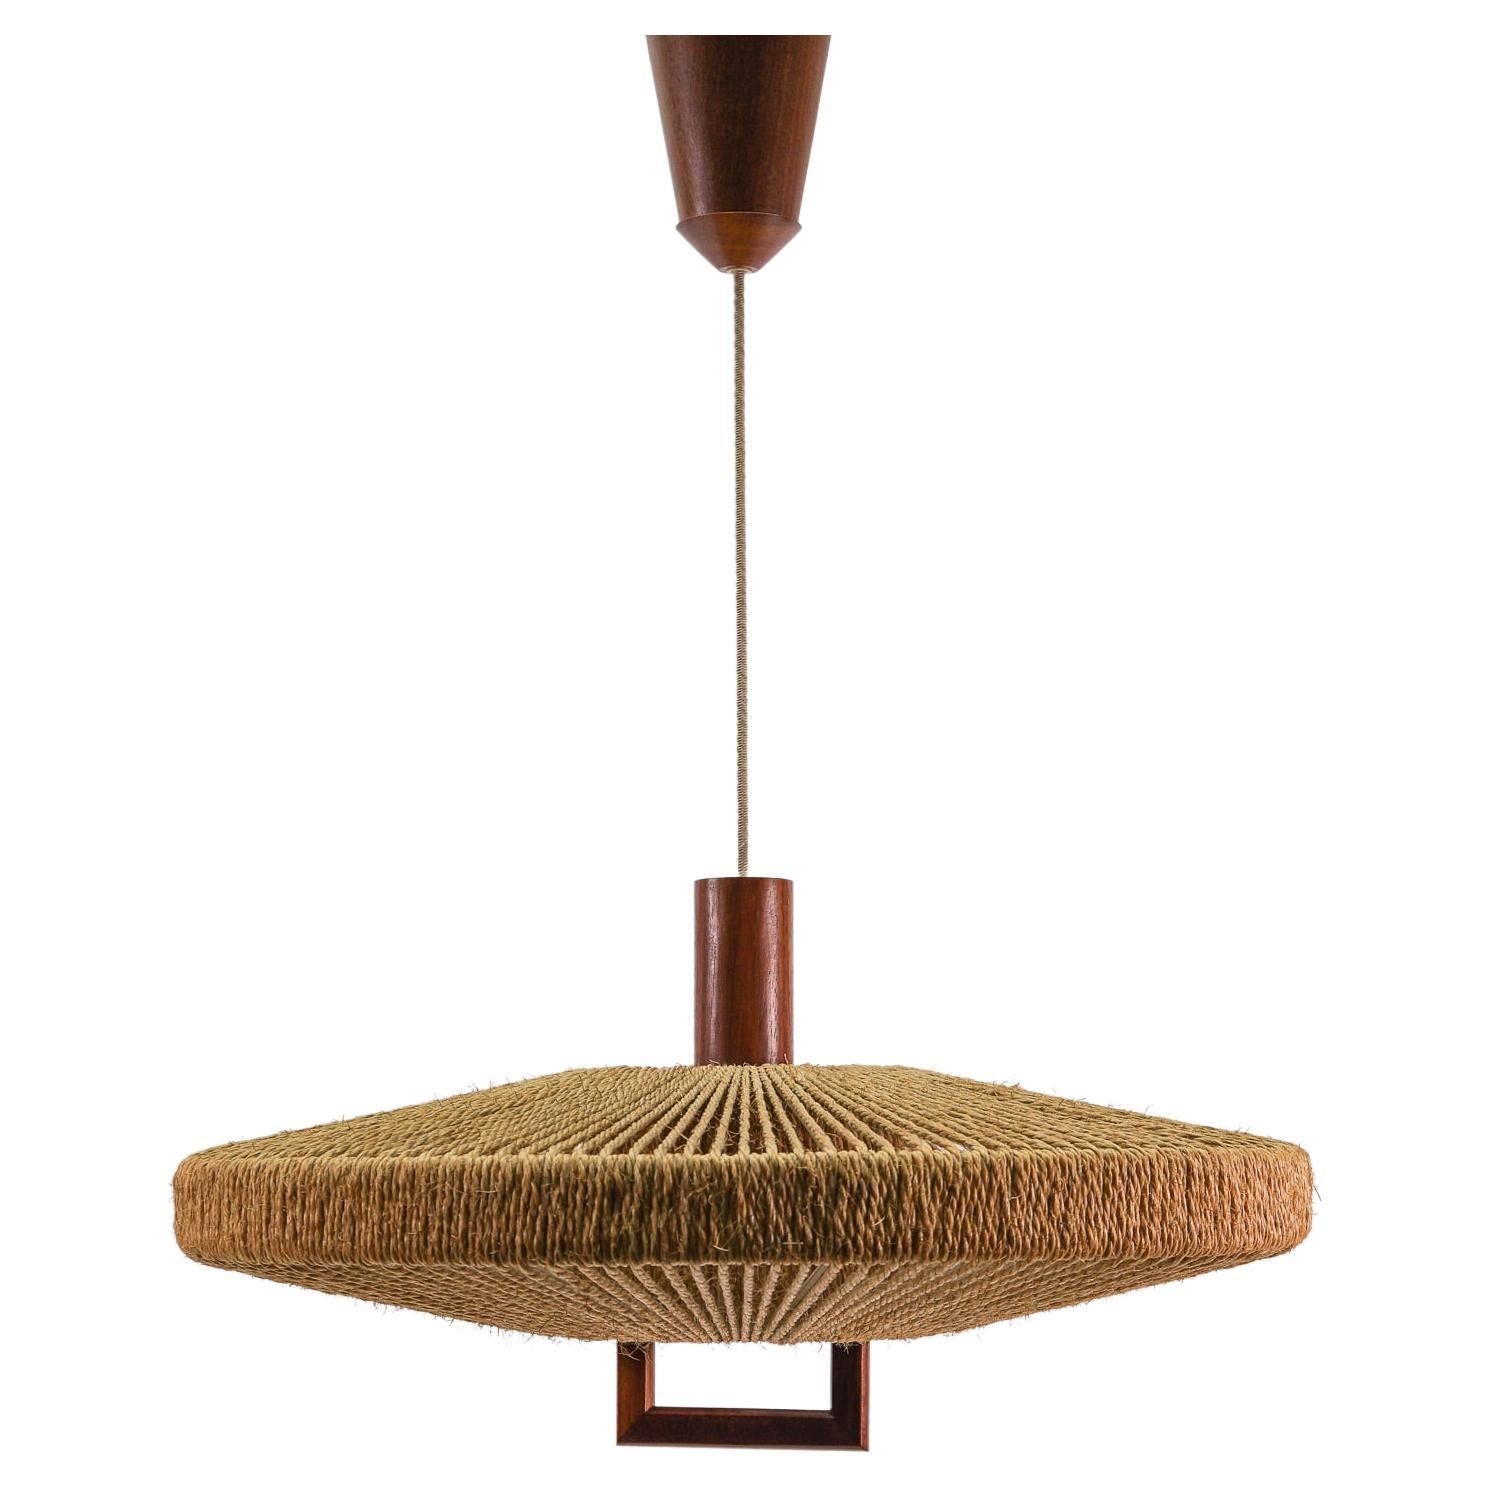 Lovely Adjustable Ceiling Lamp Made in Teak and Jute by Temde Swiss, 1960s For Sale